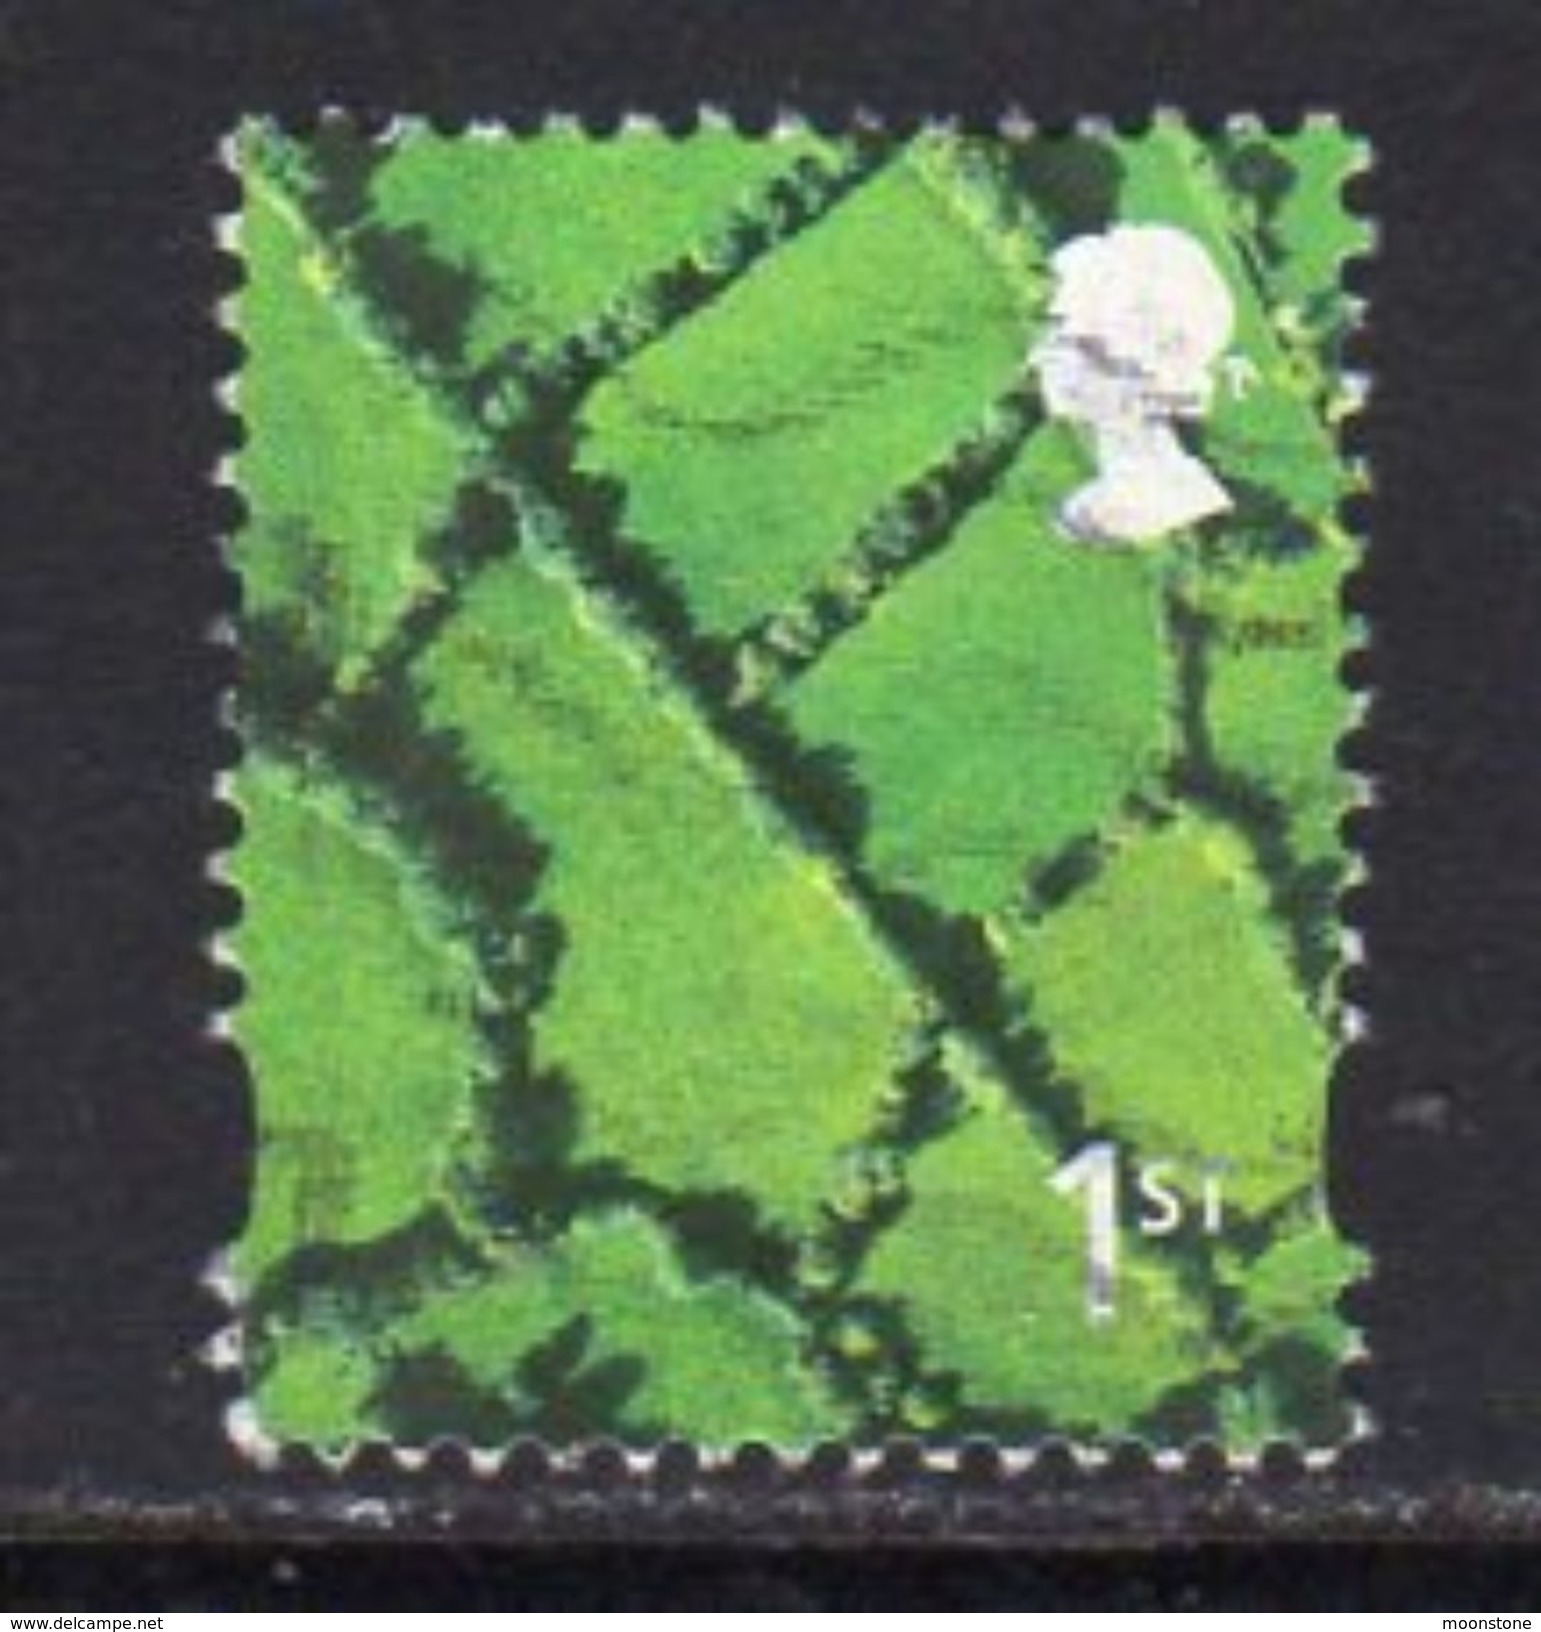 GB N. Ireland 2001-3 1st Class No Border Regional Country, Used, SG 90 - Nordirland